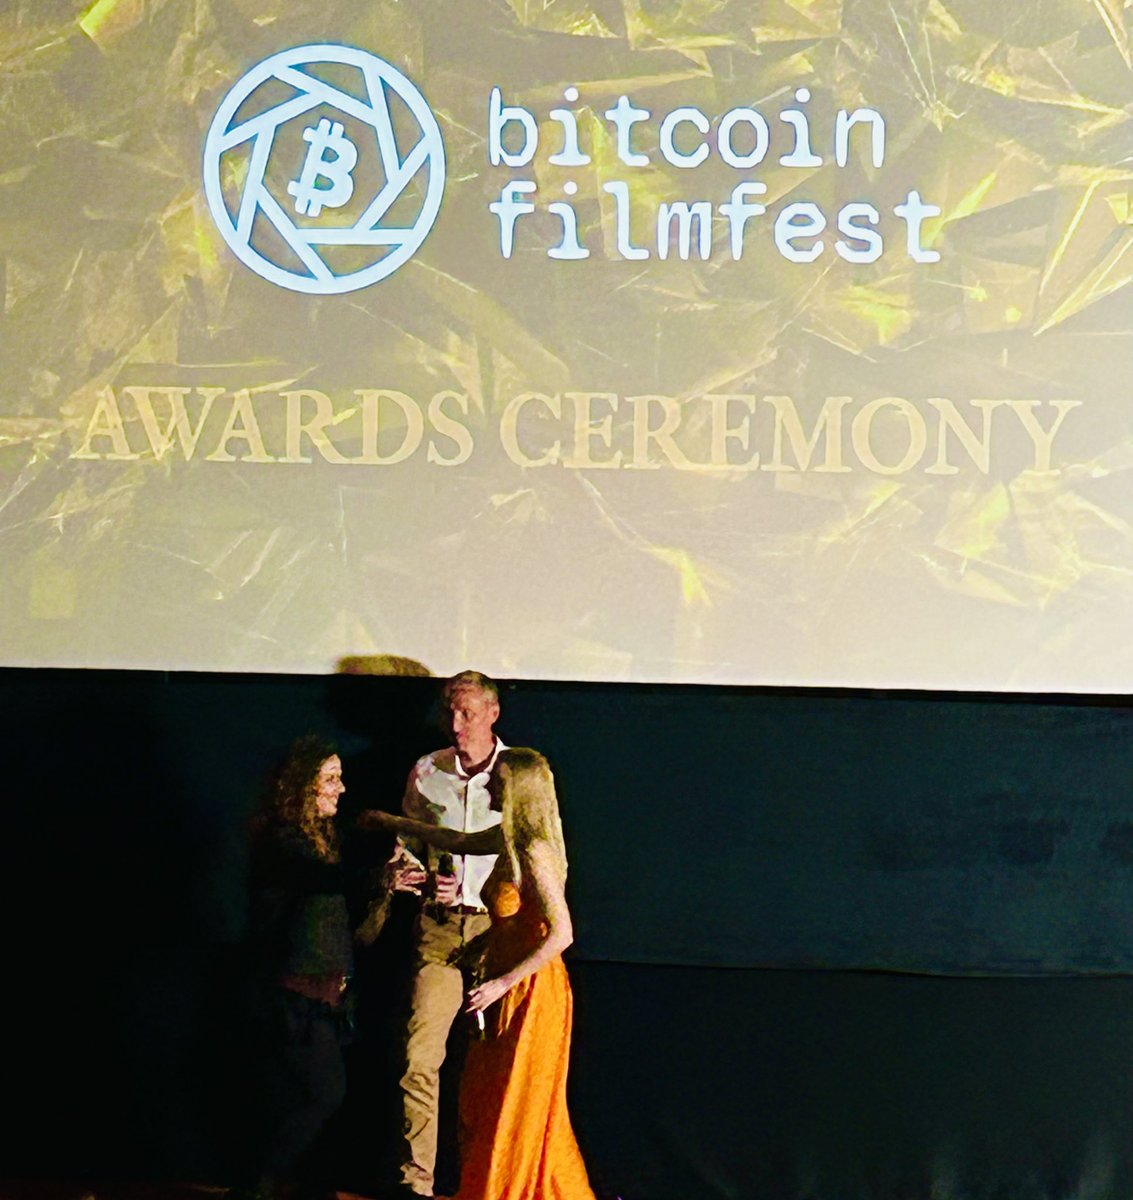 Dirty Coin won Best Film at the 2nd Annual Bitcoin FilmFest. 🔥 #Bitcoin  dirtycointhemovie.com